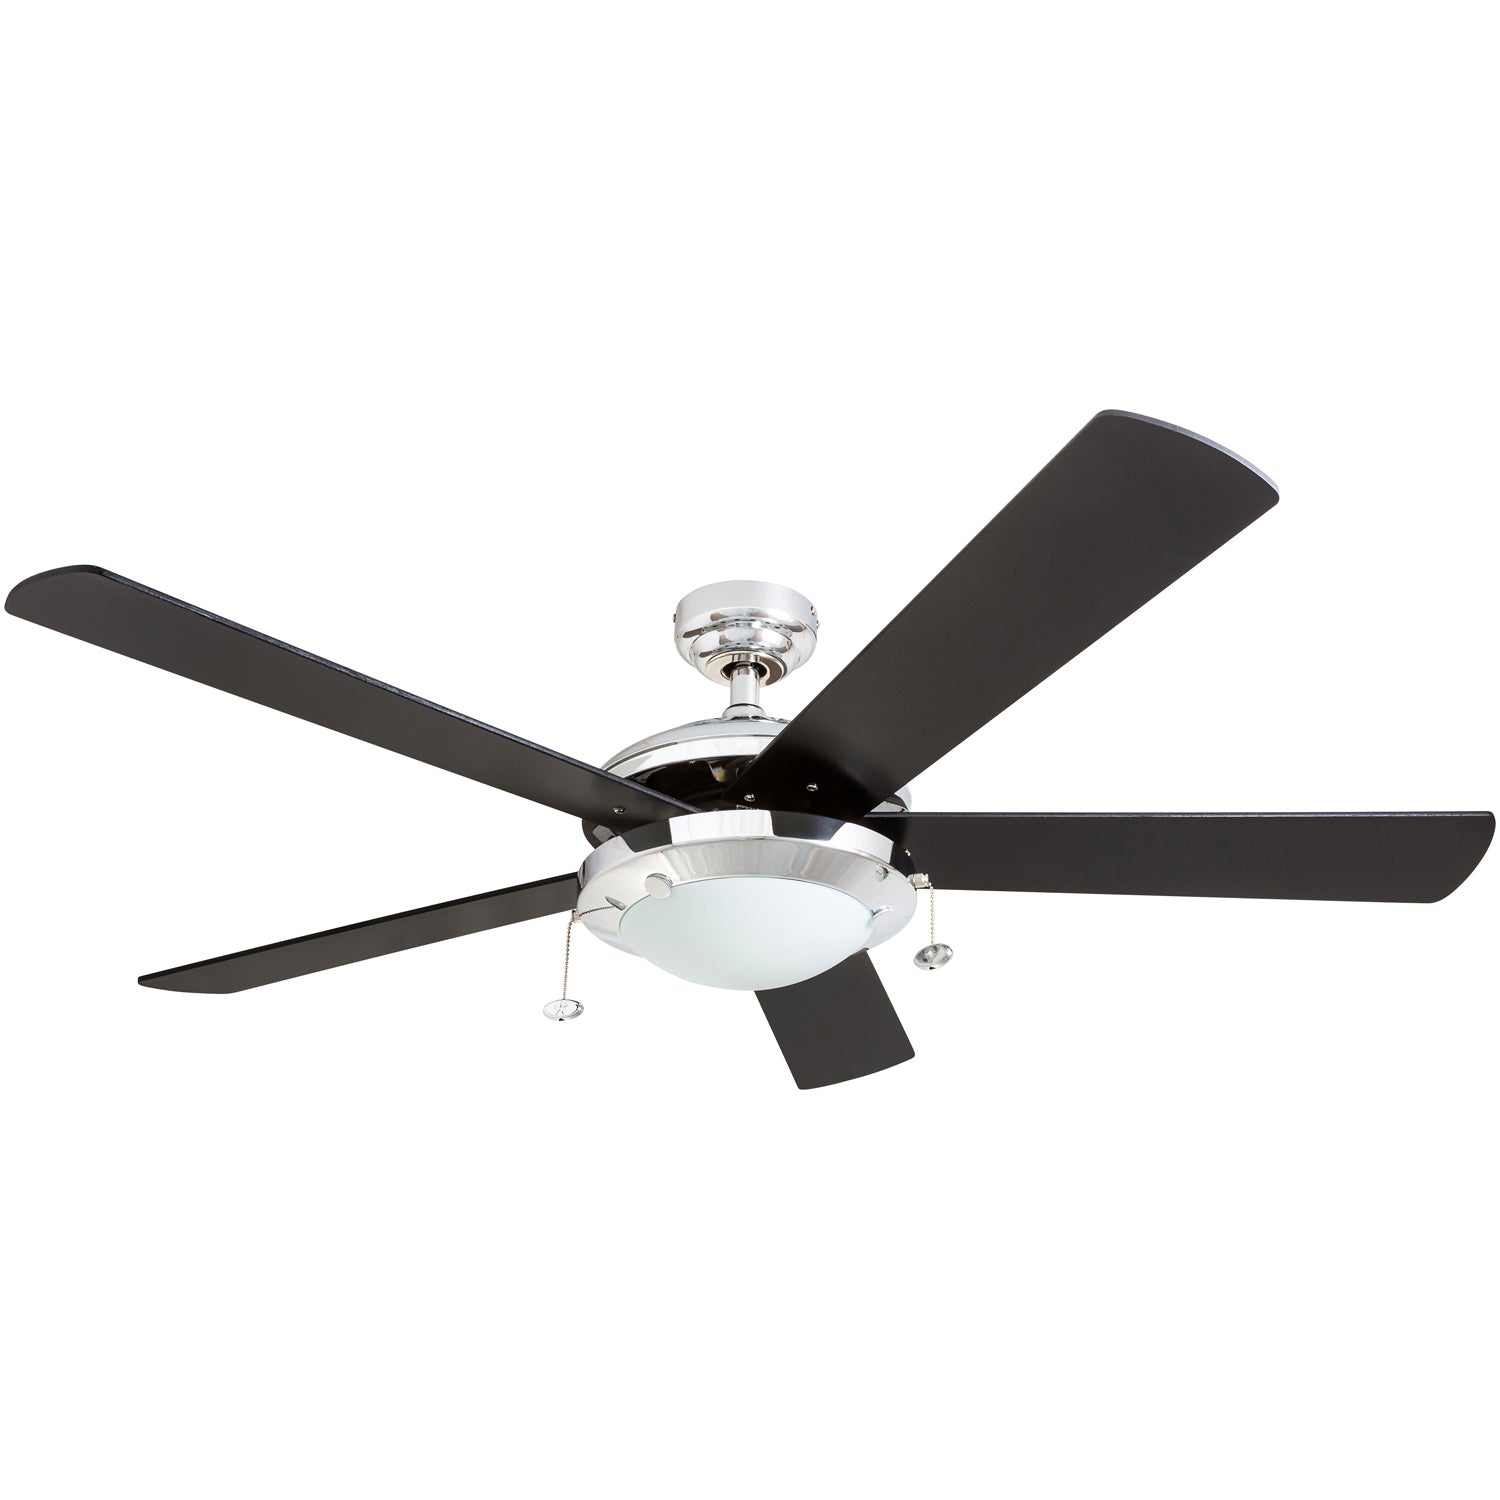 52 Inch Bolivar, Chrome, Pull Chain, Ceiling Fan by Prominence Home